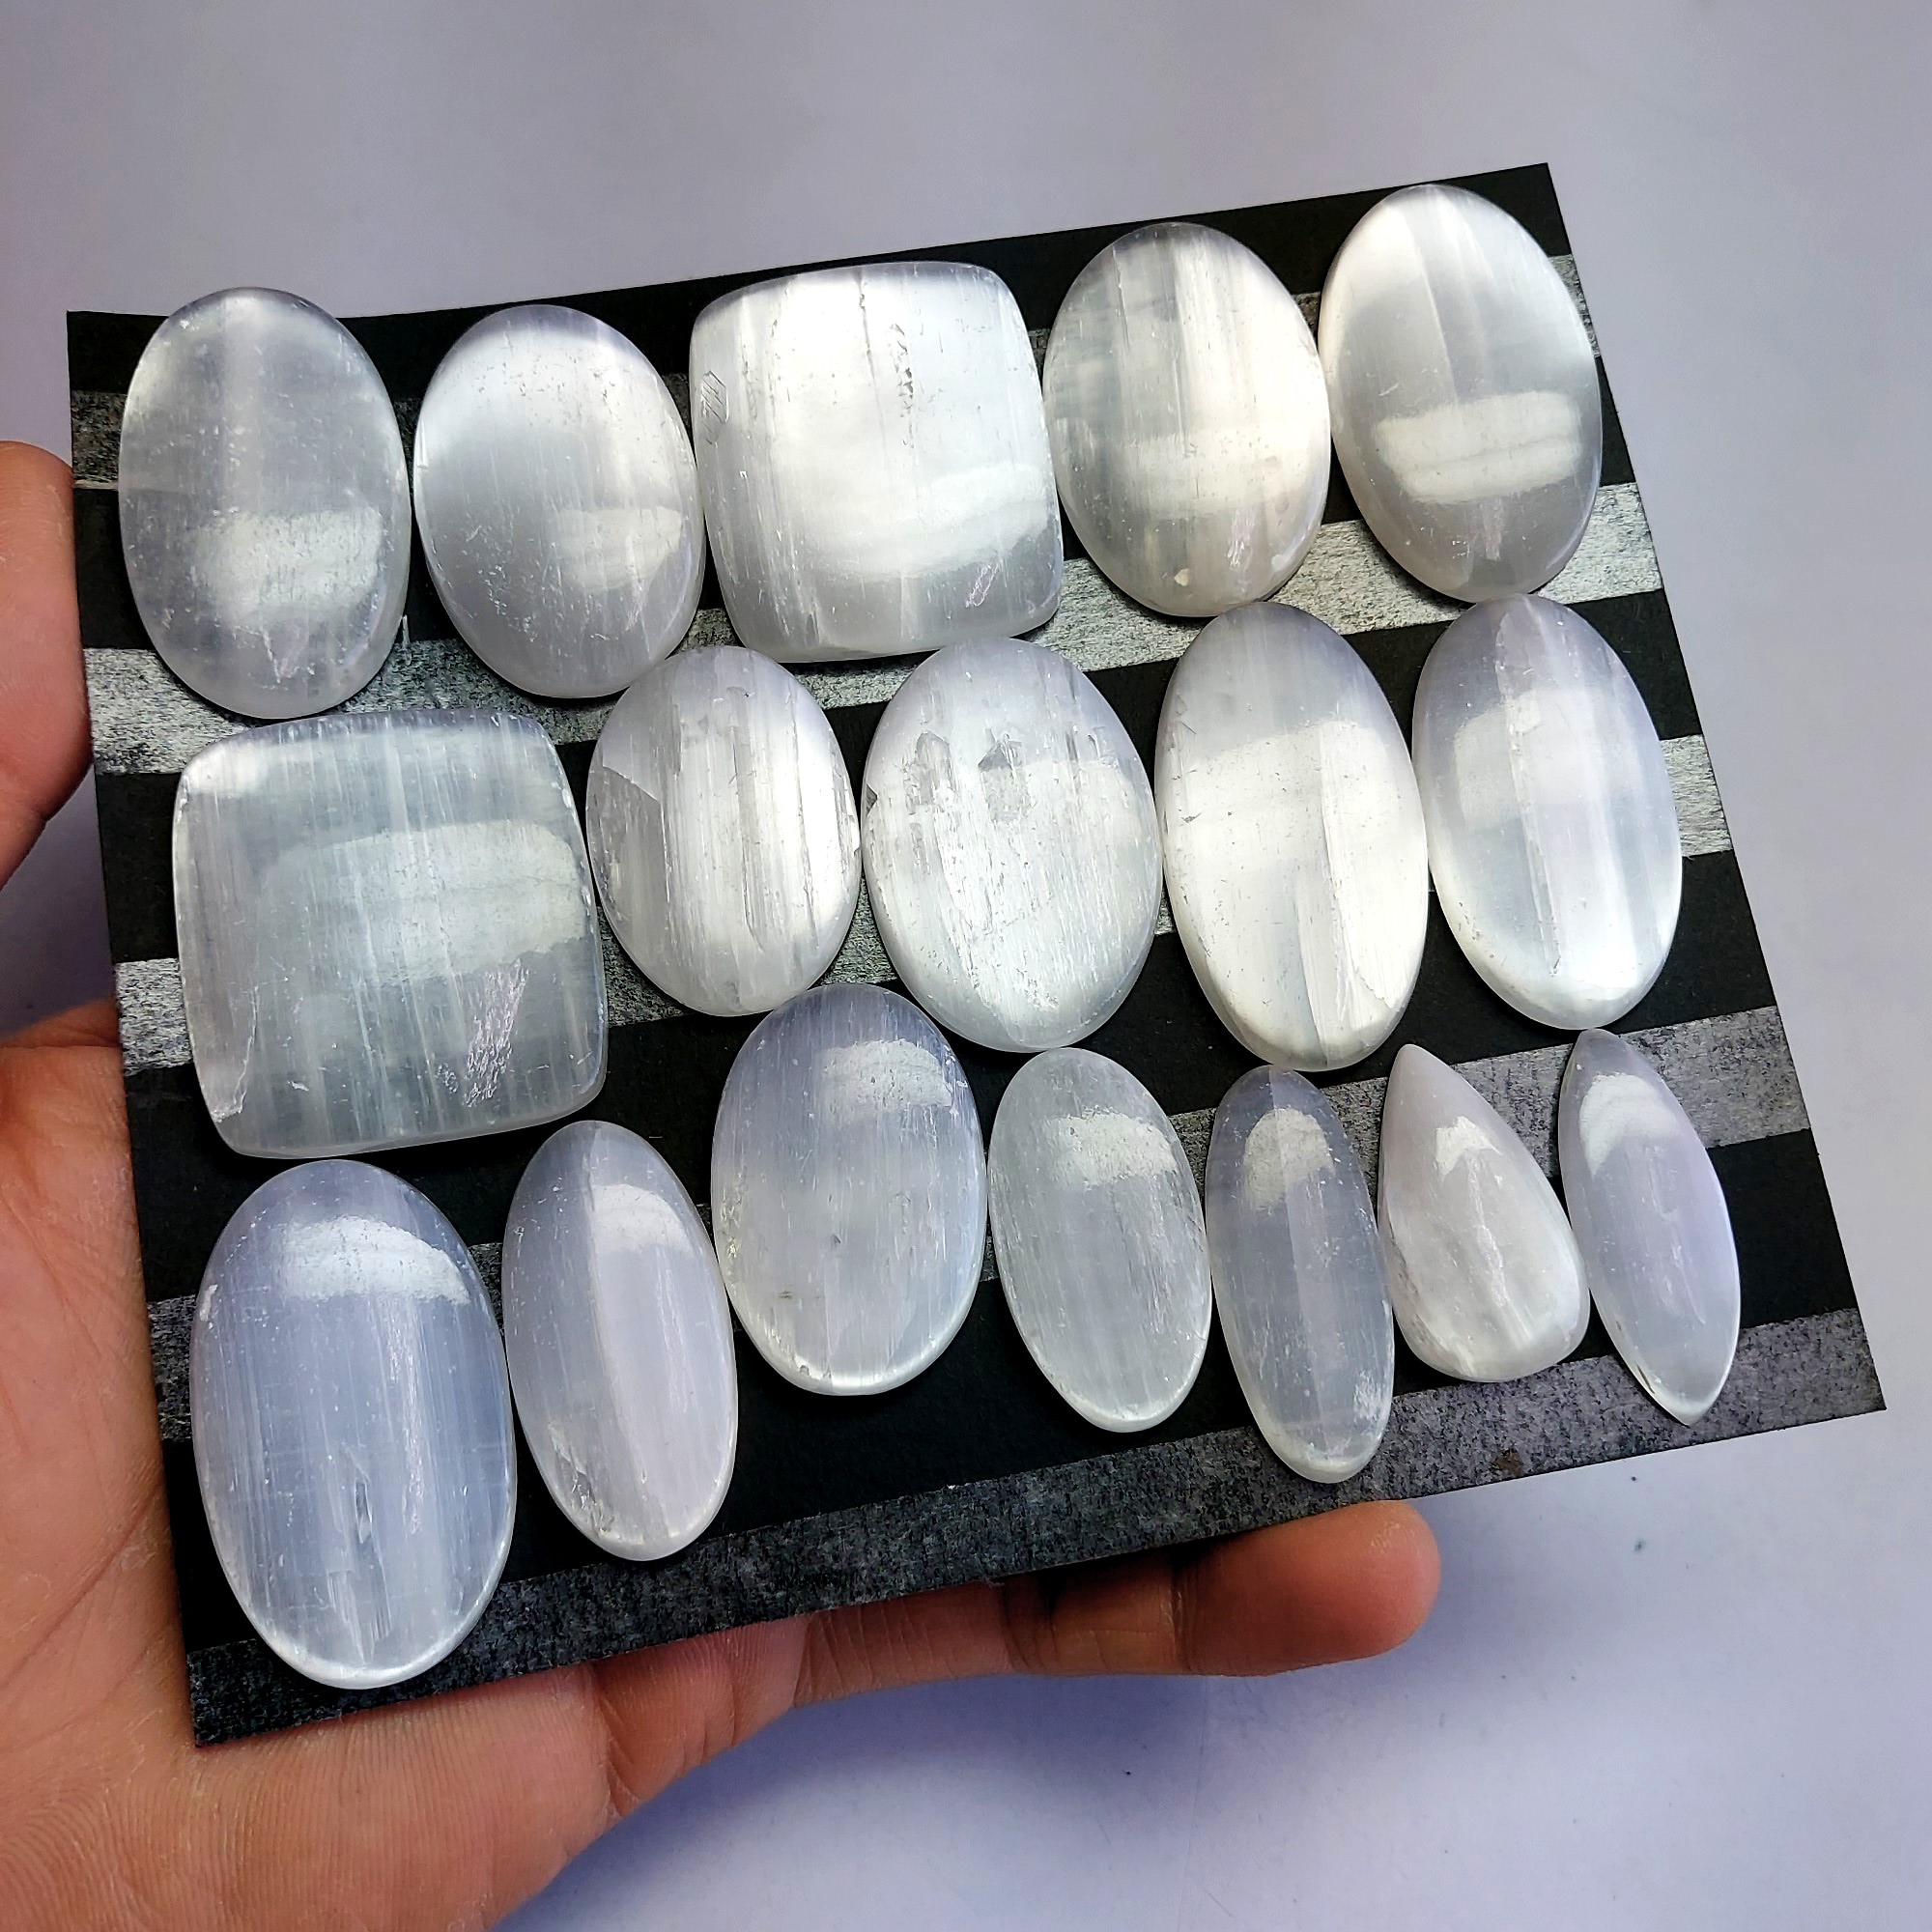 17pcs 865Cts Natural White Selenite Loose Cabochon Lot  Gemstone For Jewelry Wholesale Lot Size 40x38 30x16mm